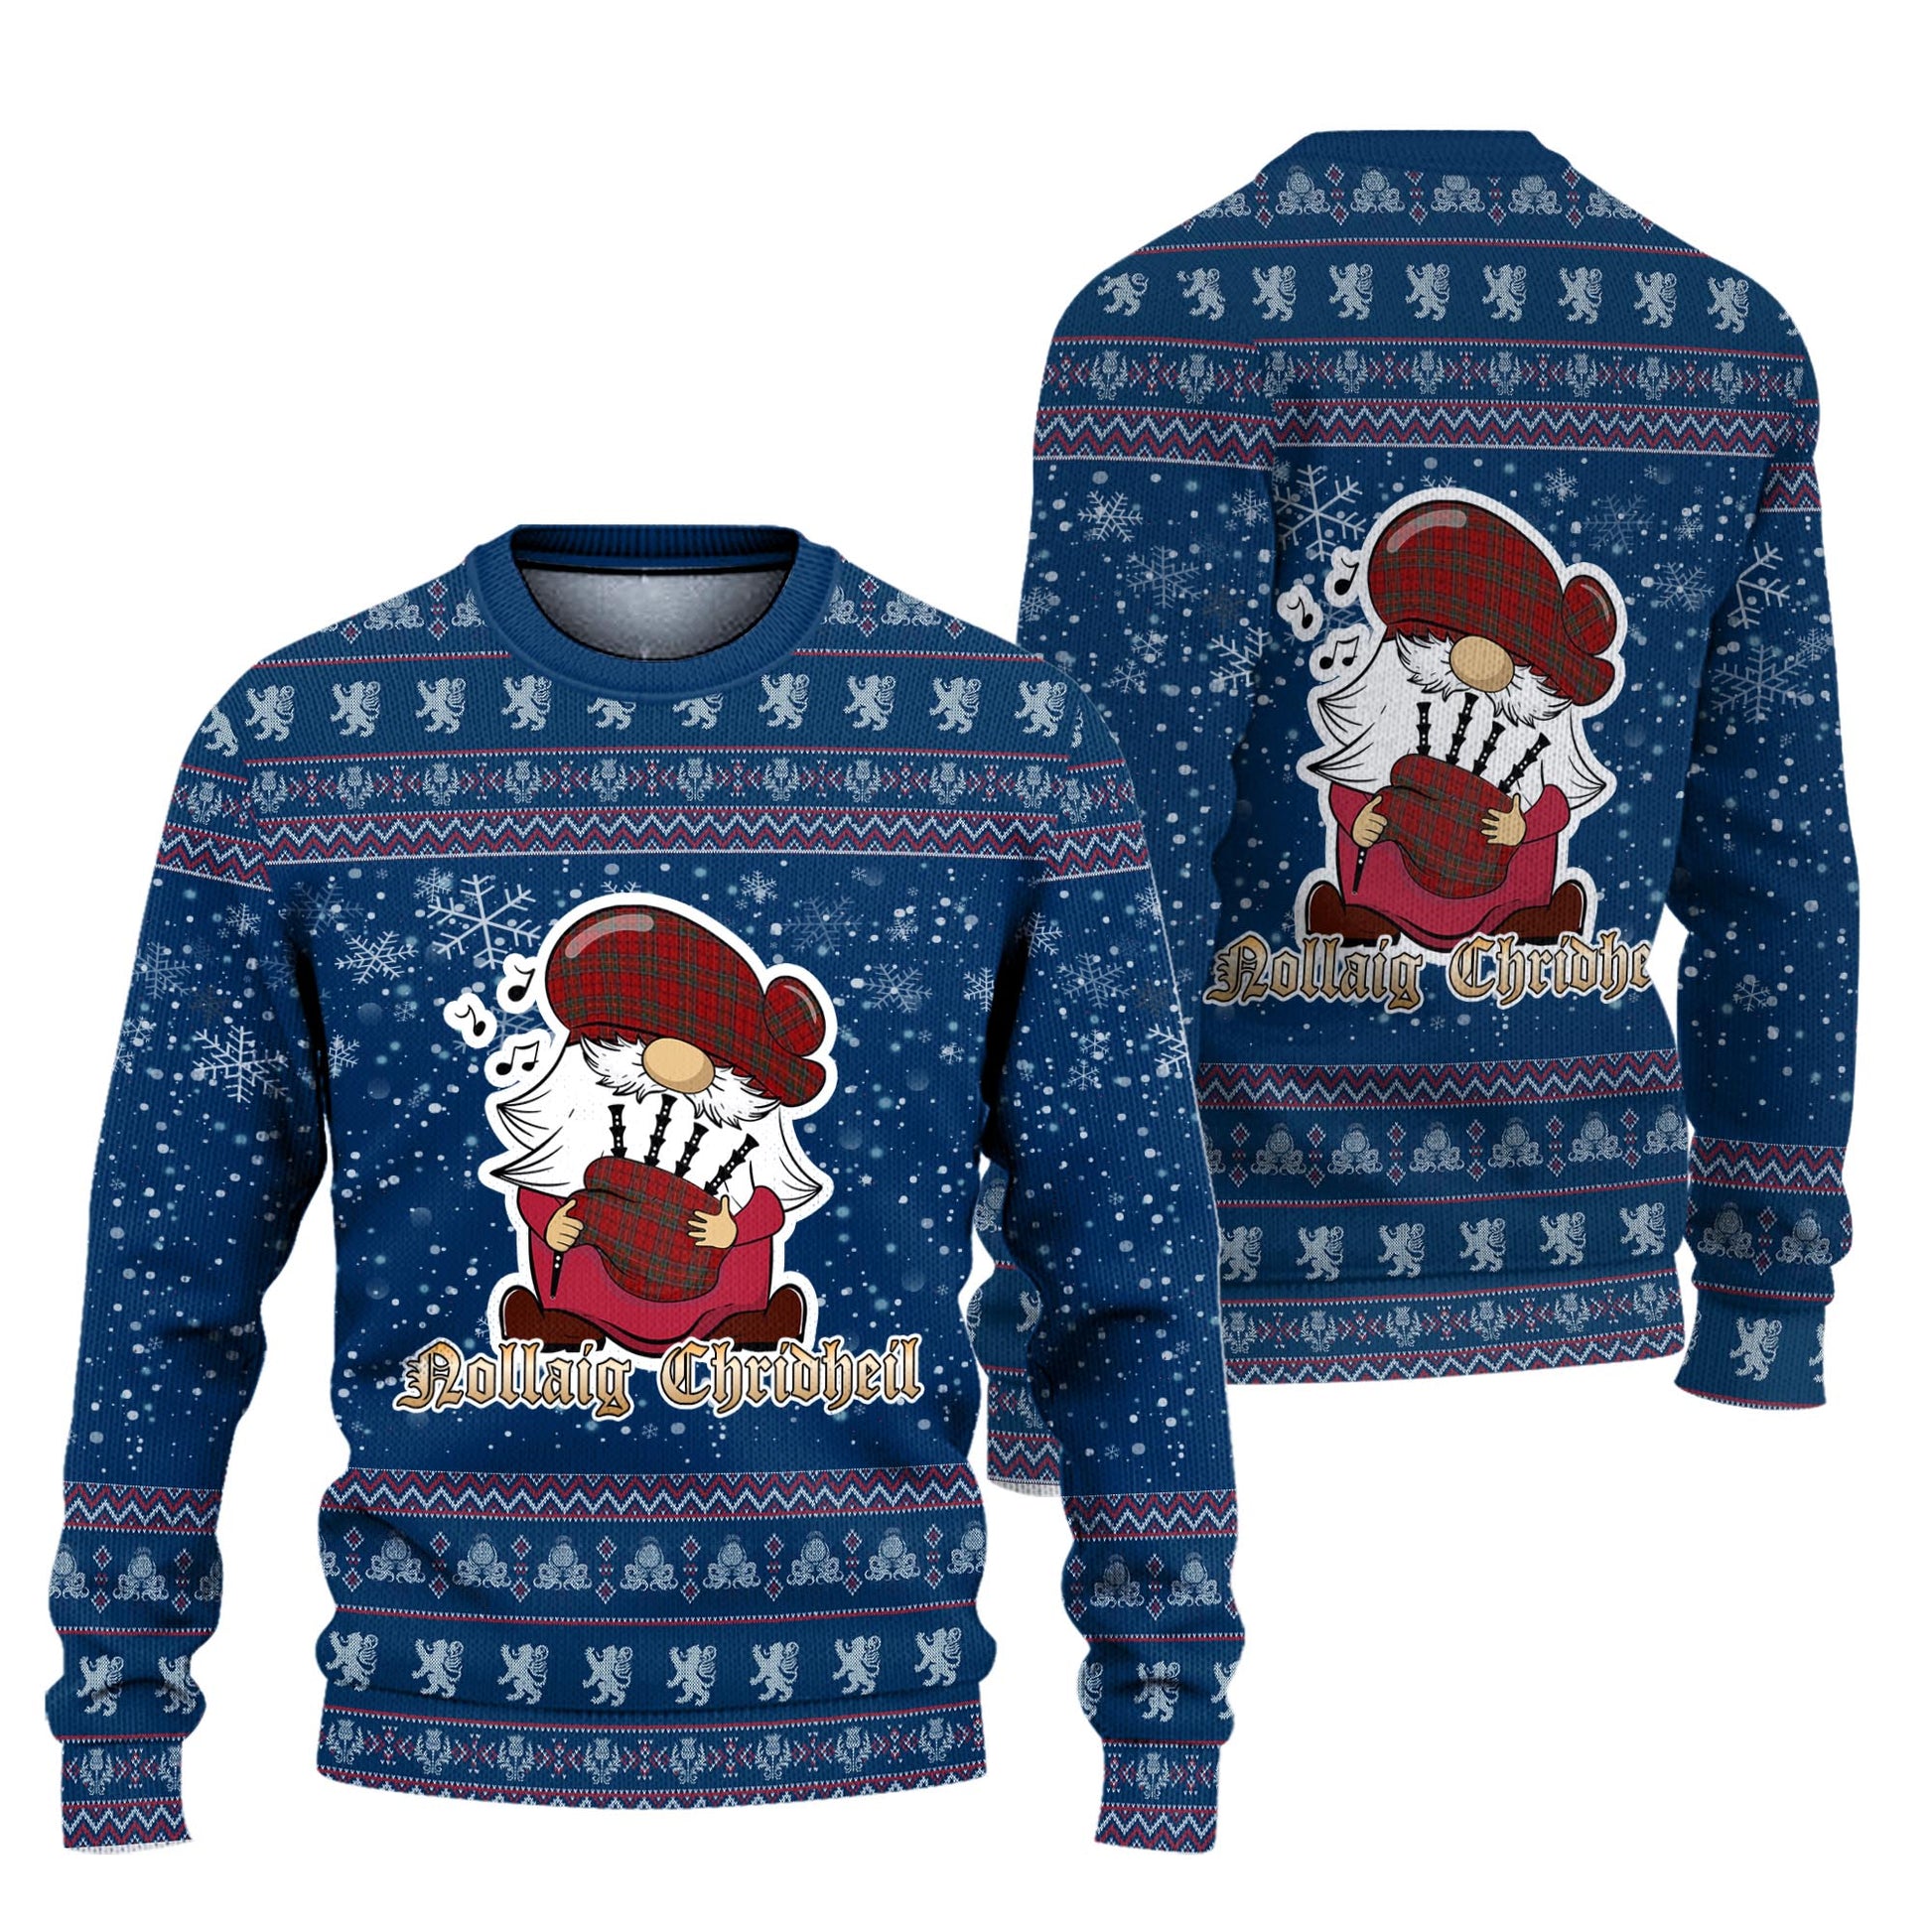 Stewart of Galloway Clan Christmas Family Knitted Sweater with Funny Gnome Playing Bagpipes Unisex Blue - Tartanvibesclothing